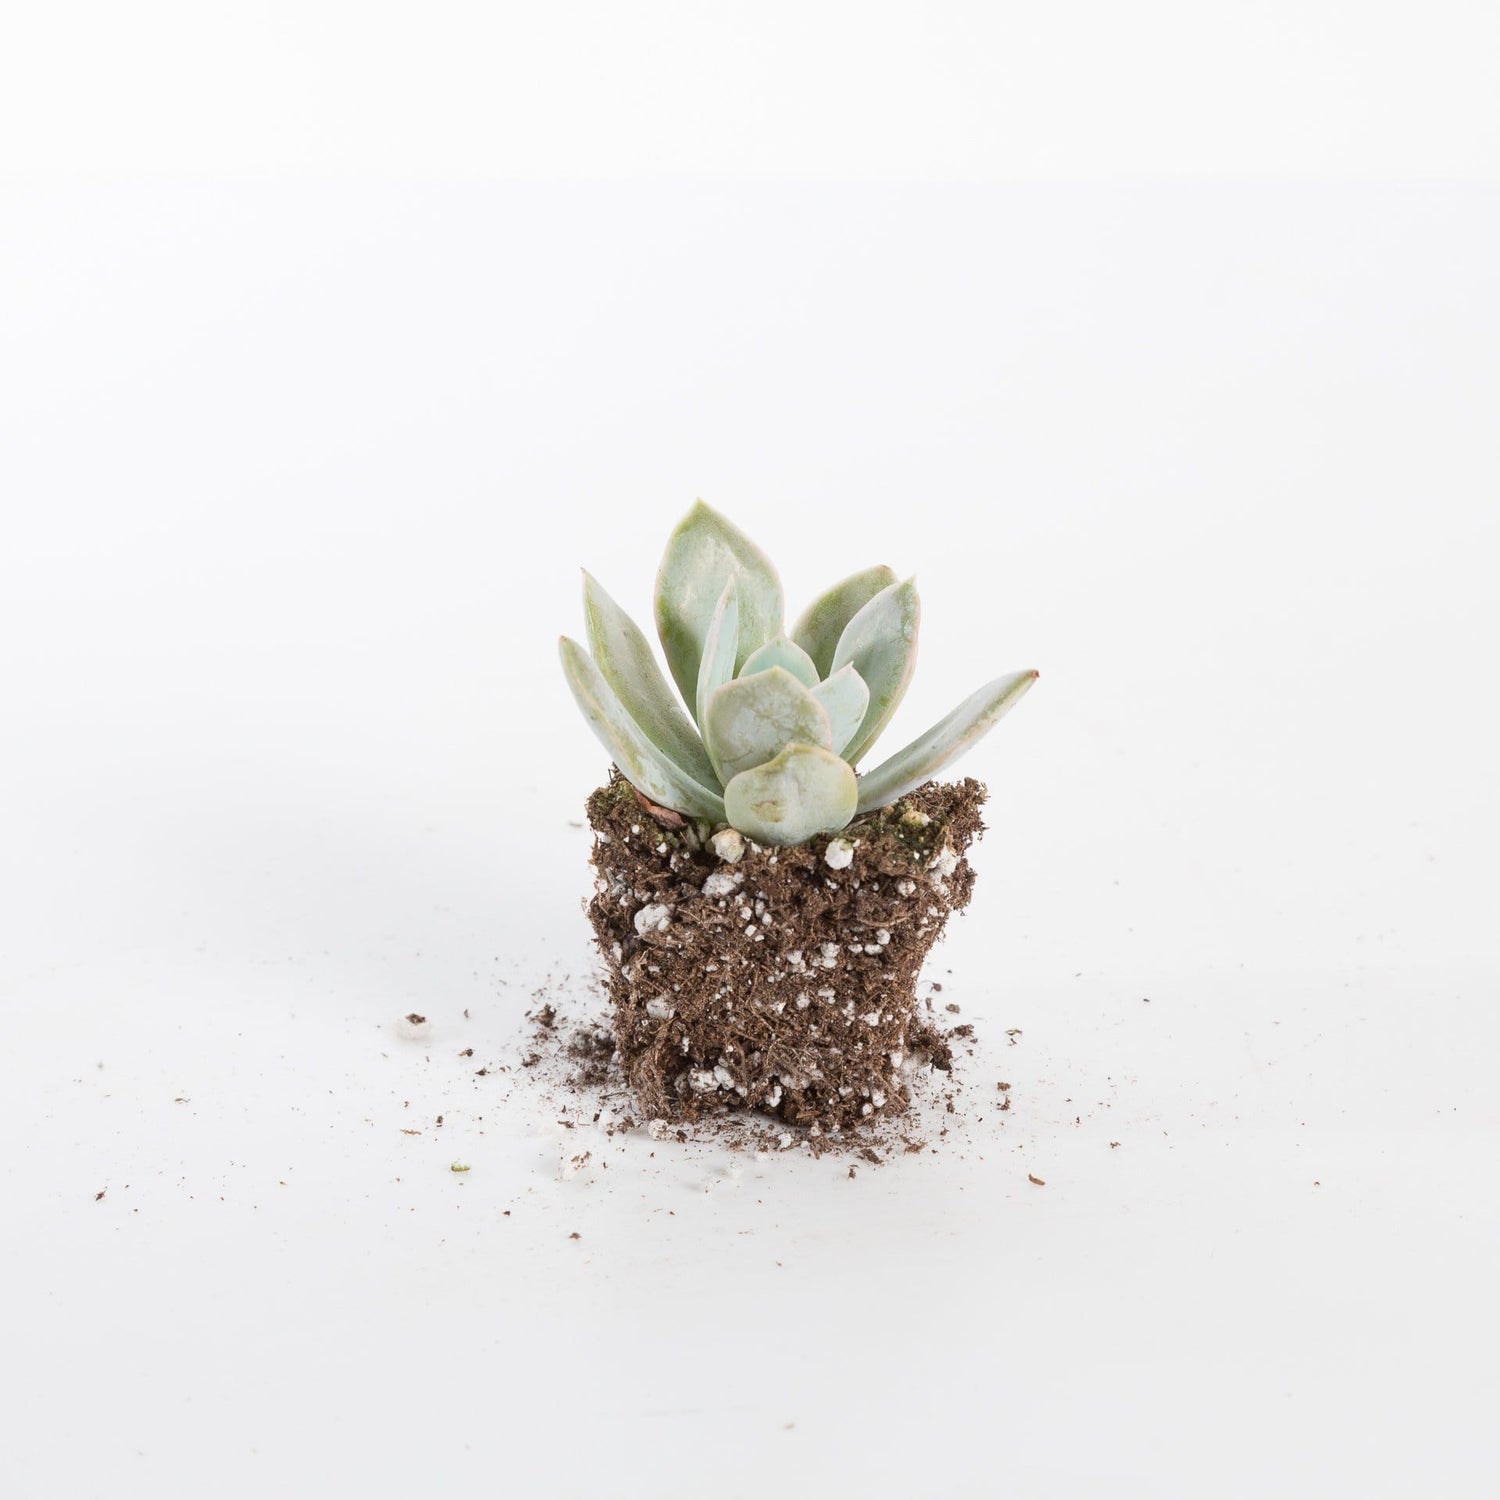 Urban Sprouts Plant 2" in nursery pot Succulent 'Powder Puff'